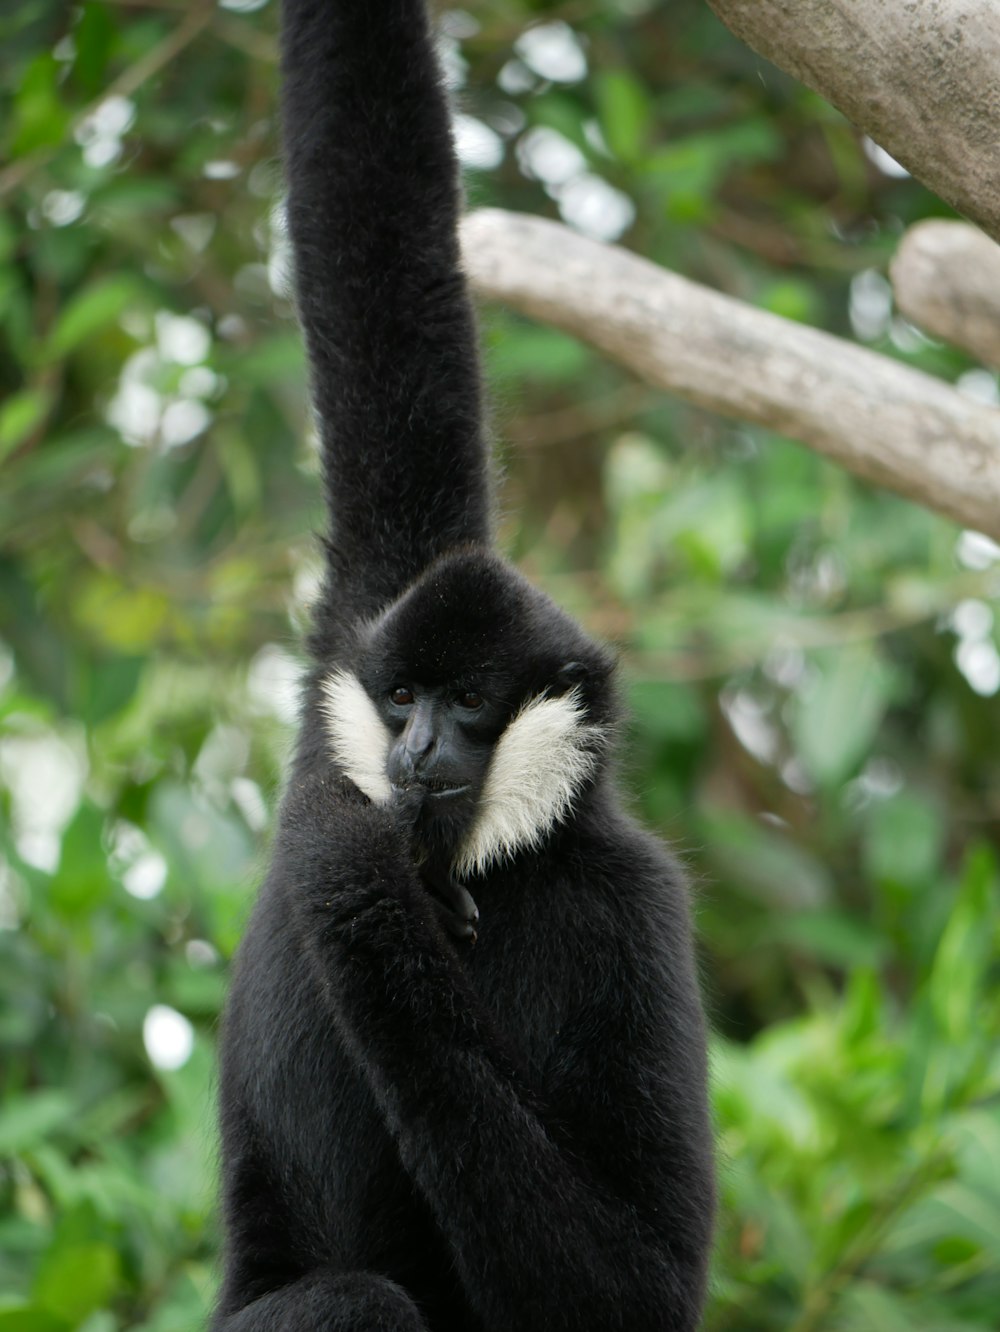 a black and white monkey hanging from a tree branch